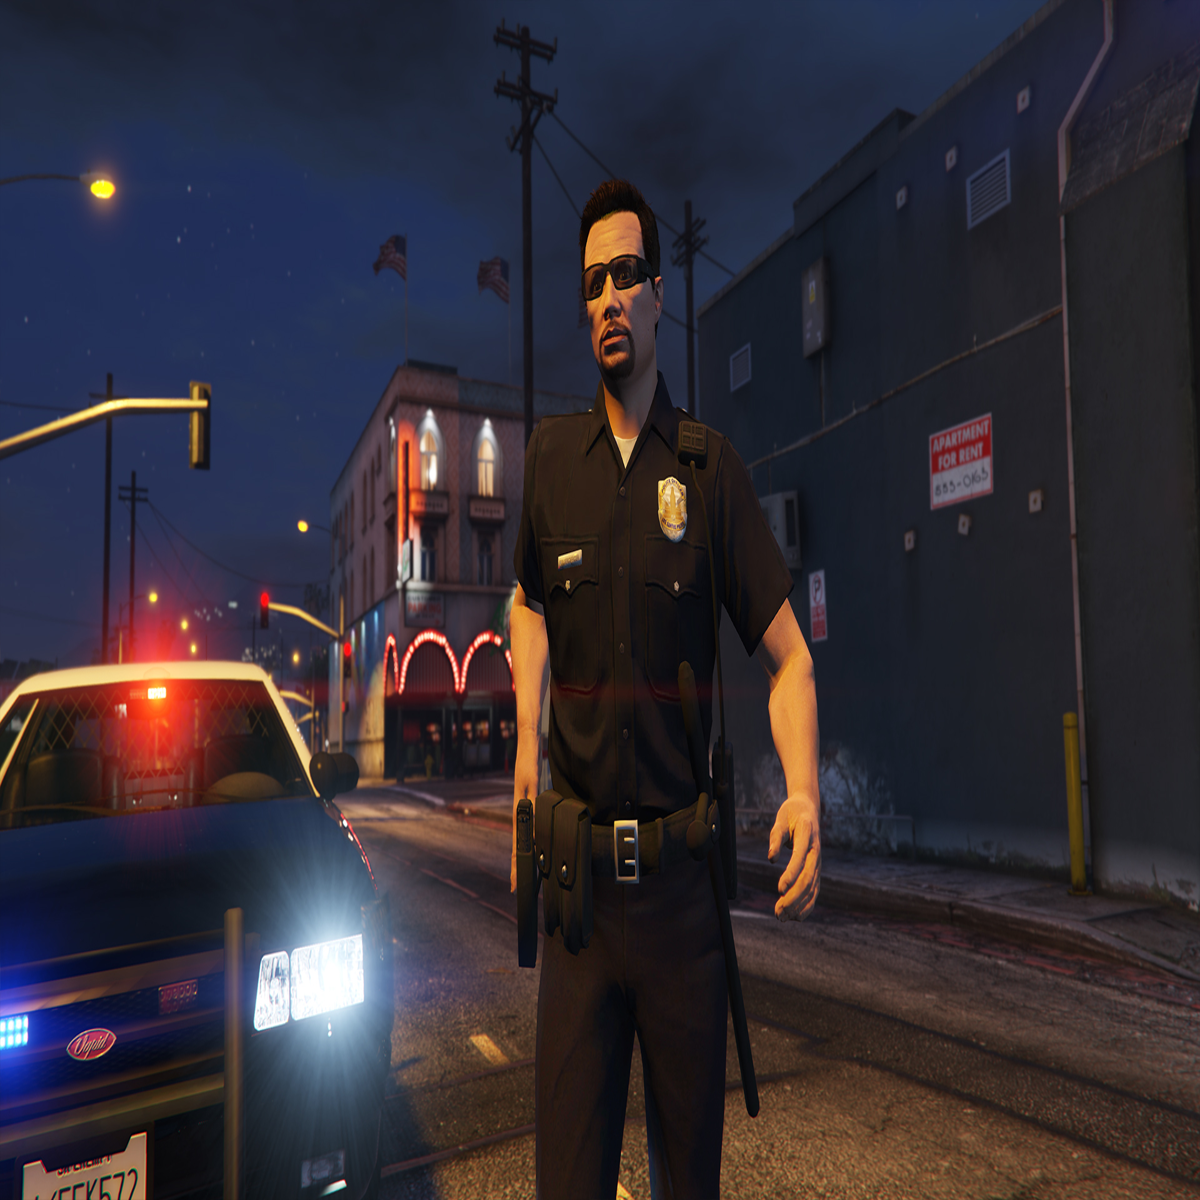 5 best GTA mods for Android